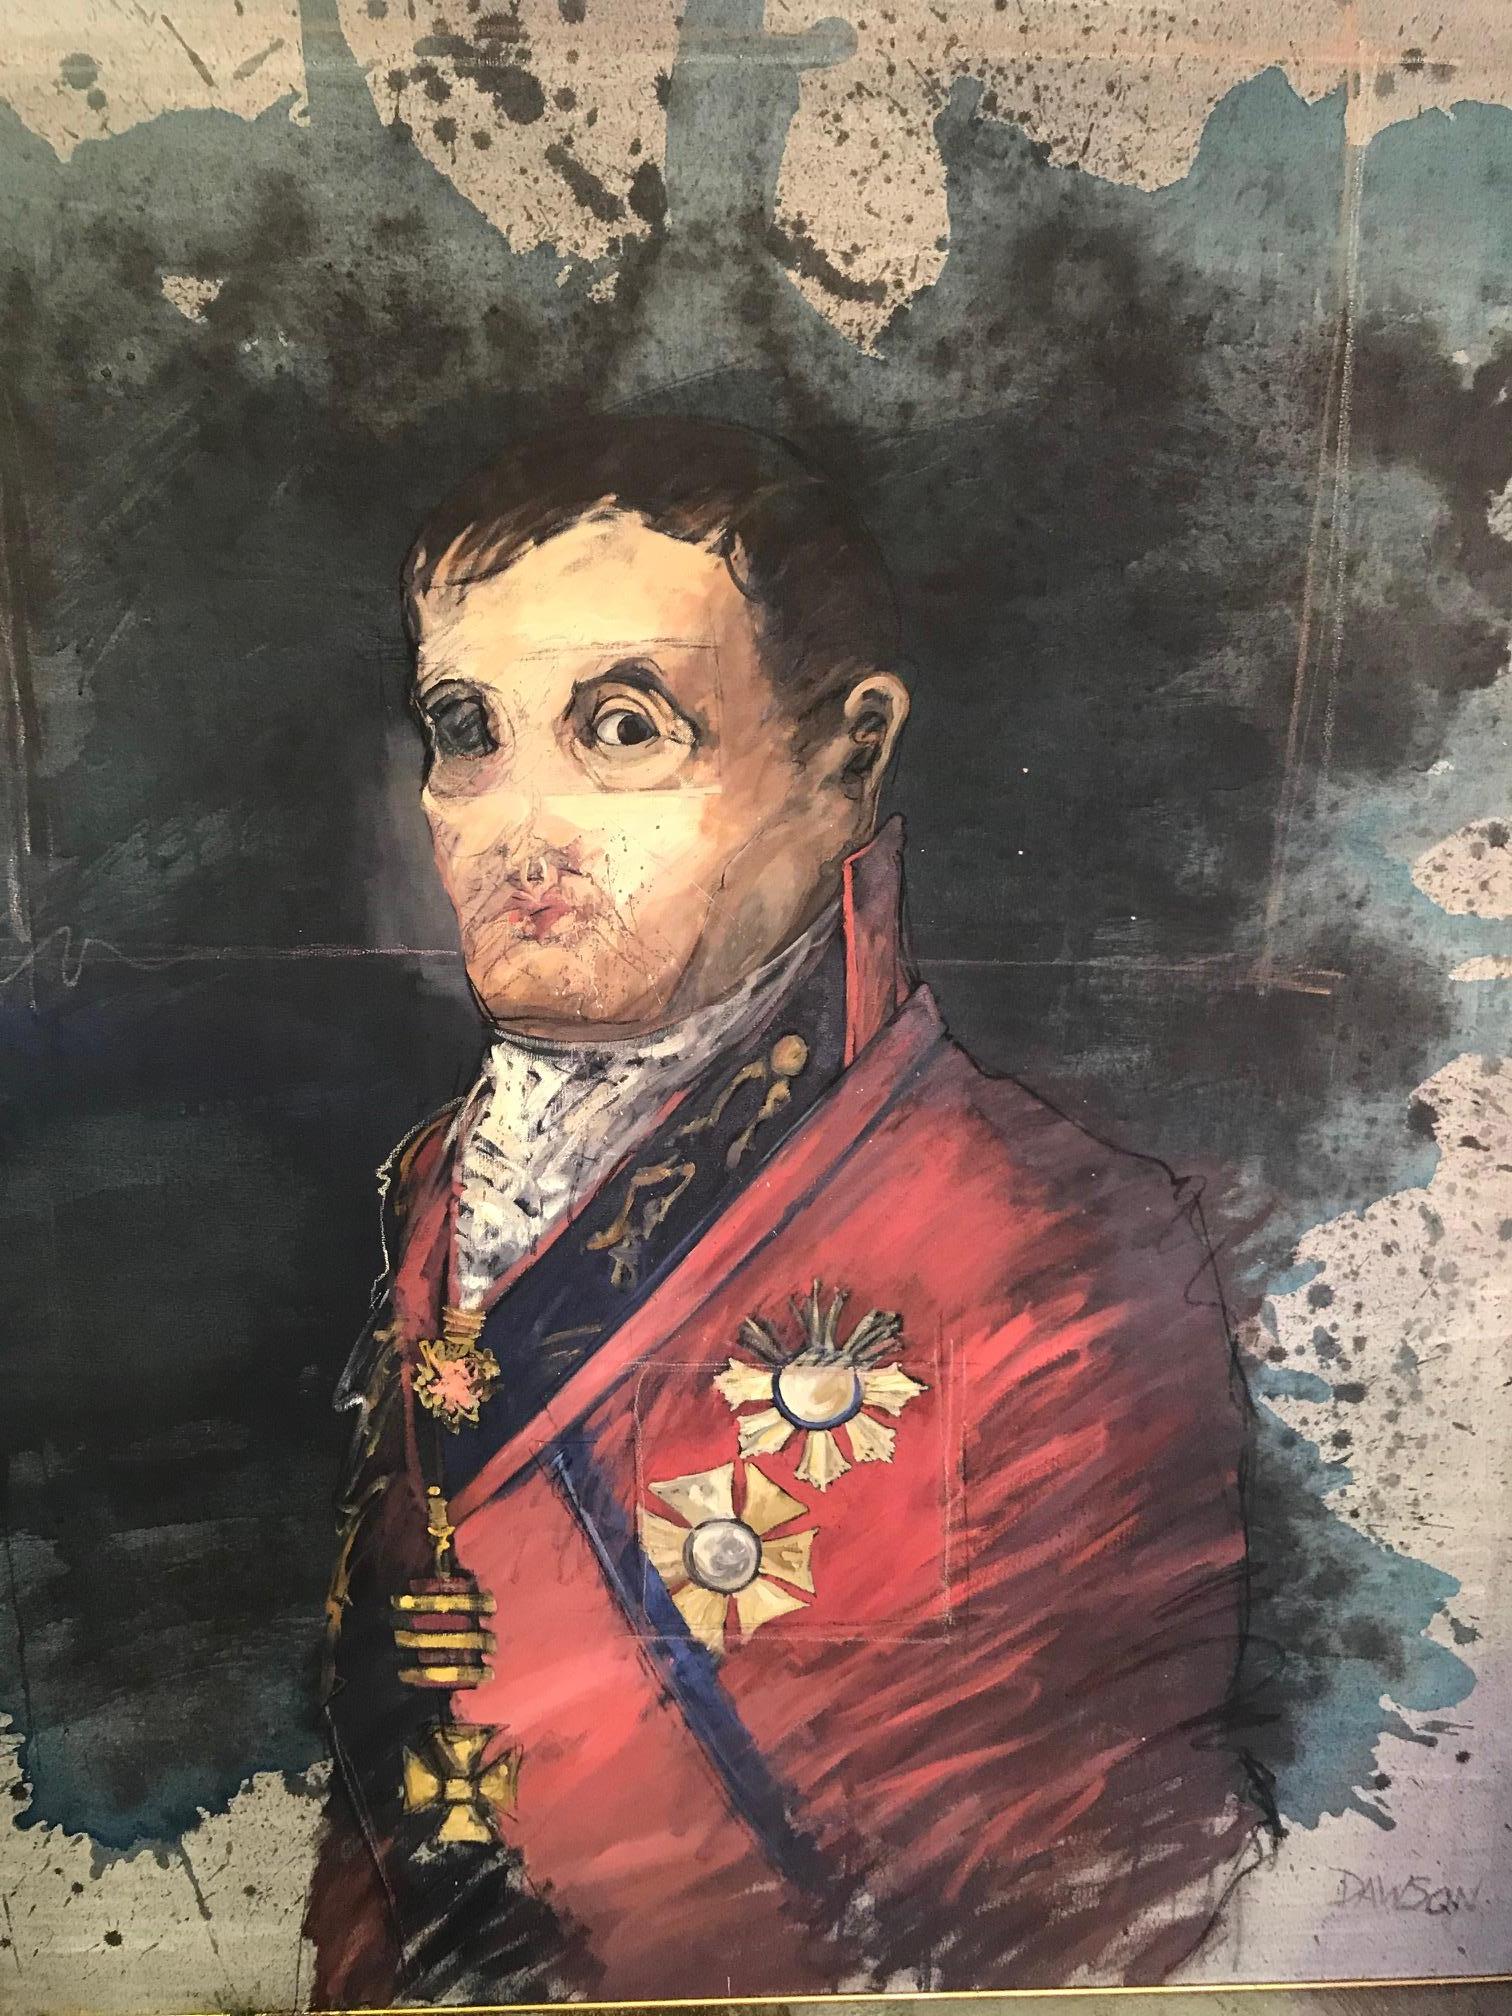 A very amazing, both in composition and sure stature, original oil on canvas portrait painting of Napoleon posing in his red ceremonial uniform by American artist John Dawson who specializes in figurative art (both painting and sculptural) that are